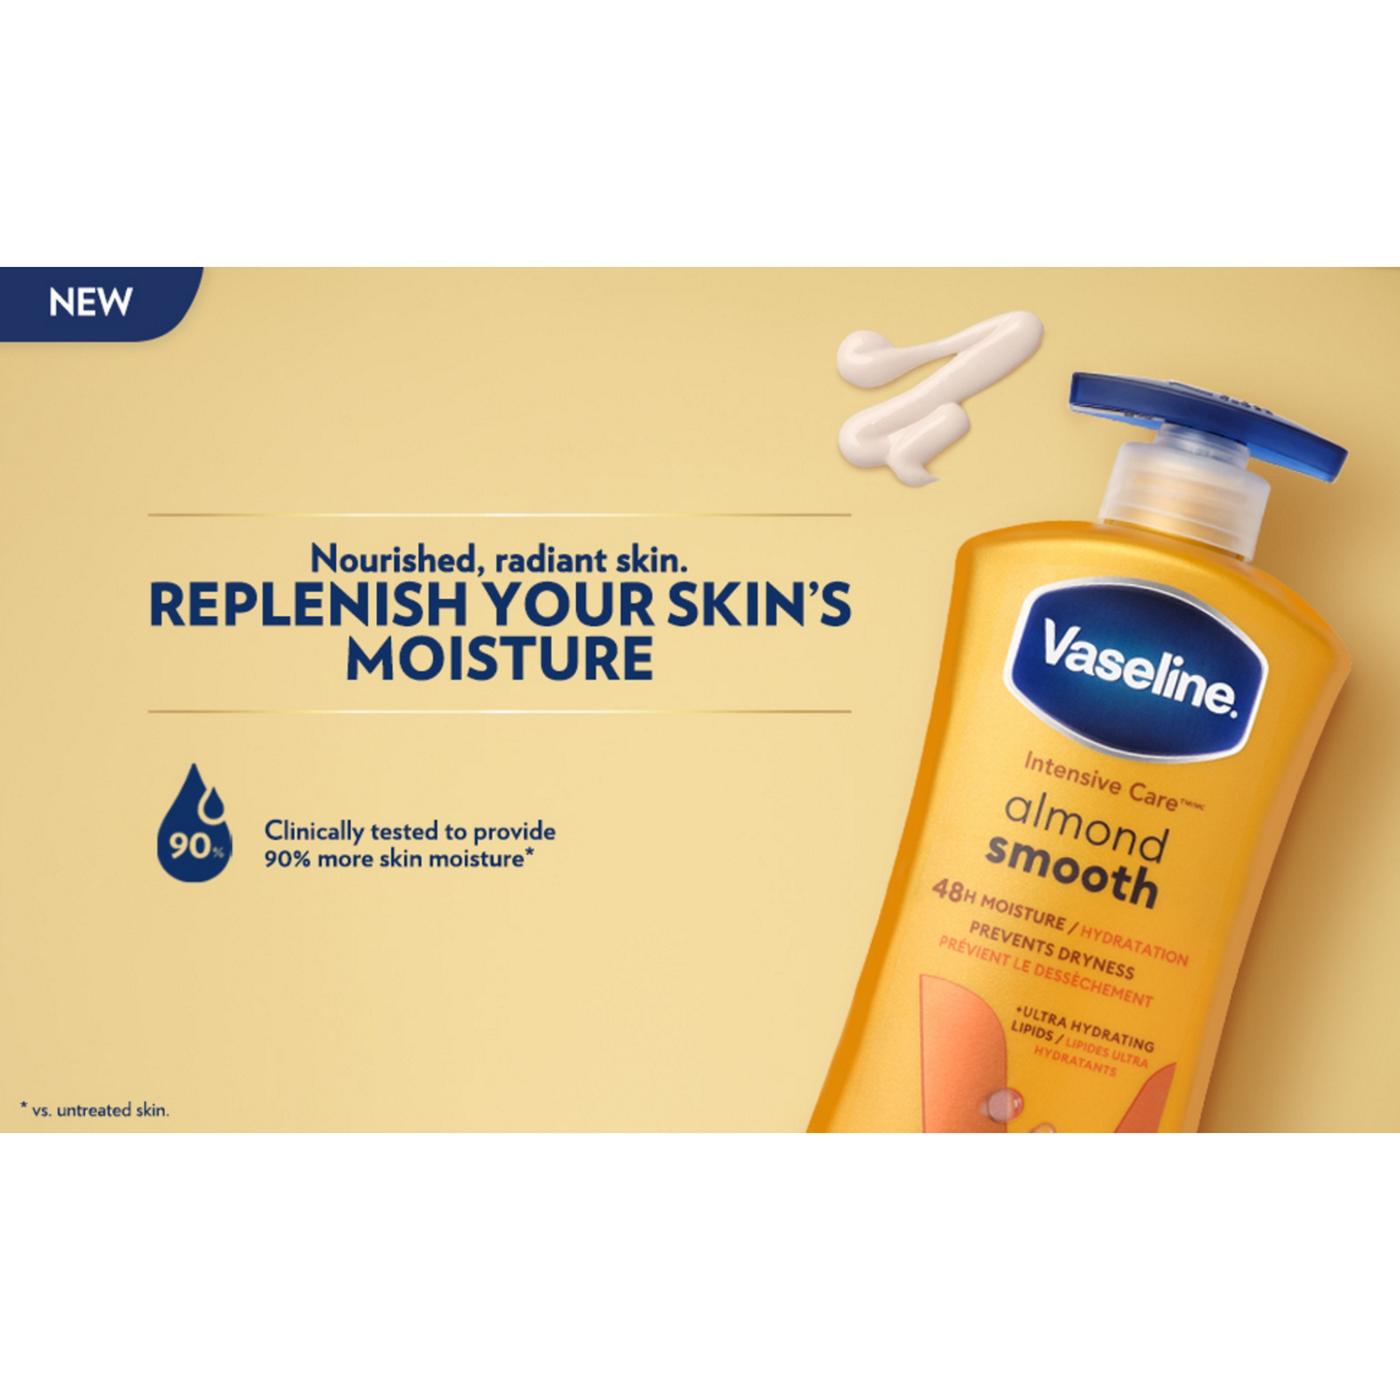 Vaseline Intensive Care Almond Smooth Lotion; image 4 of 8